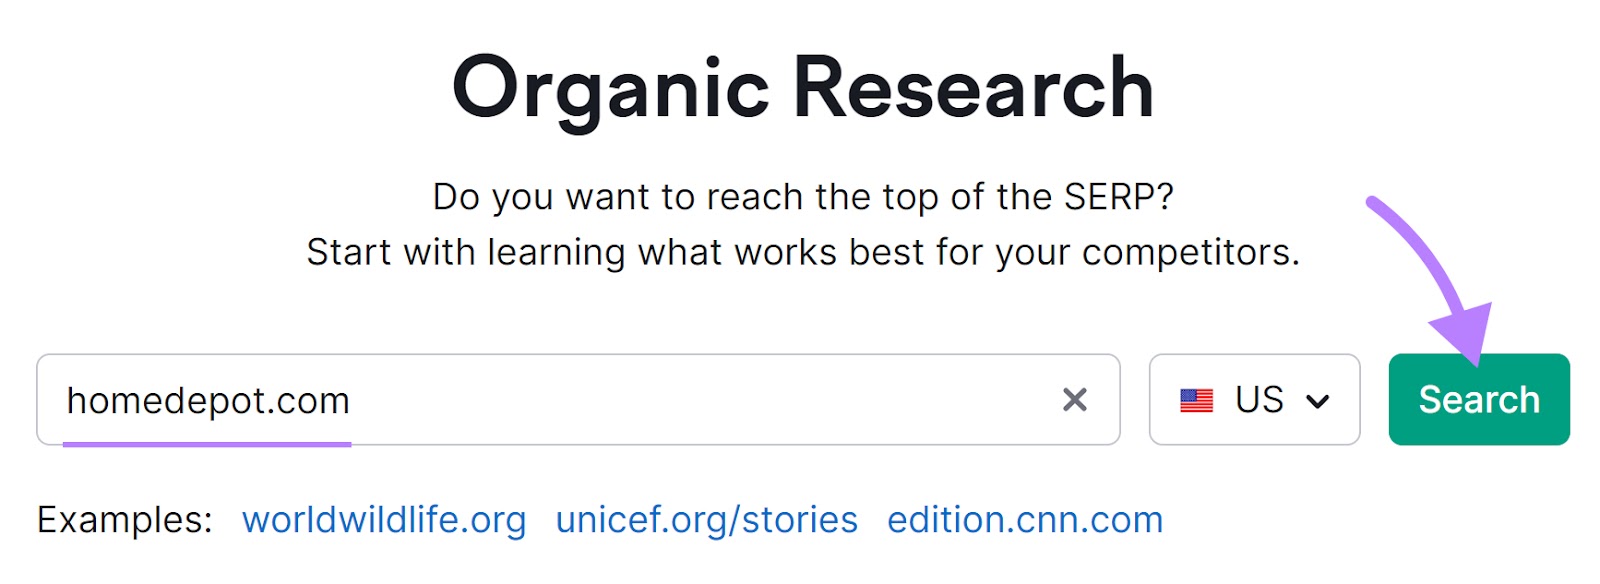 "homedepot.com" entered into Organic Research search bar